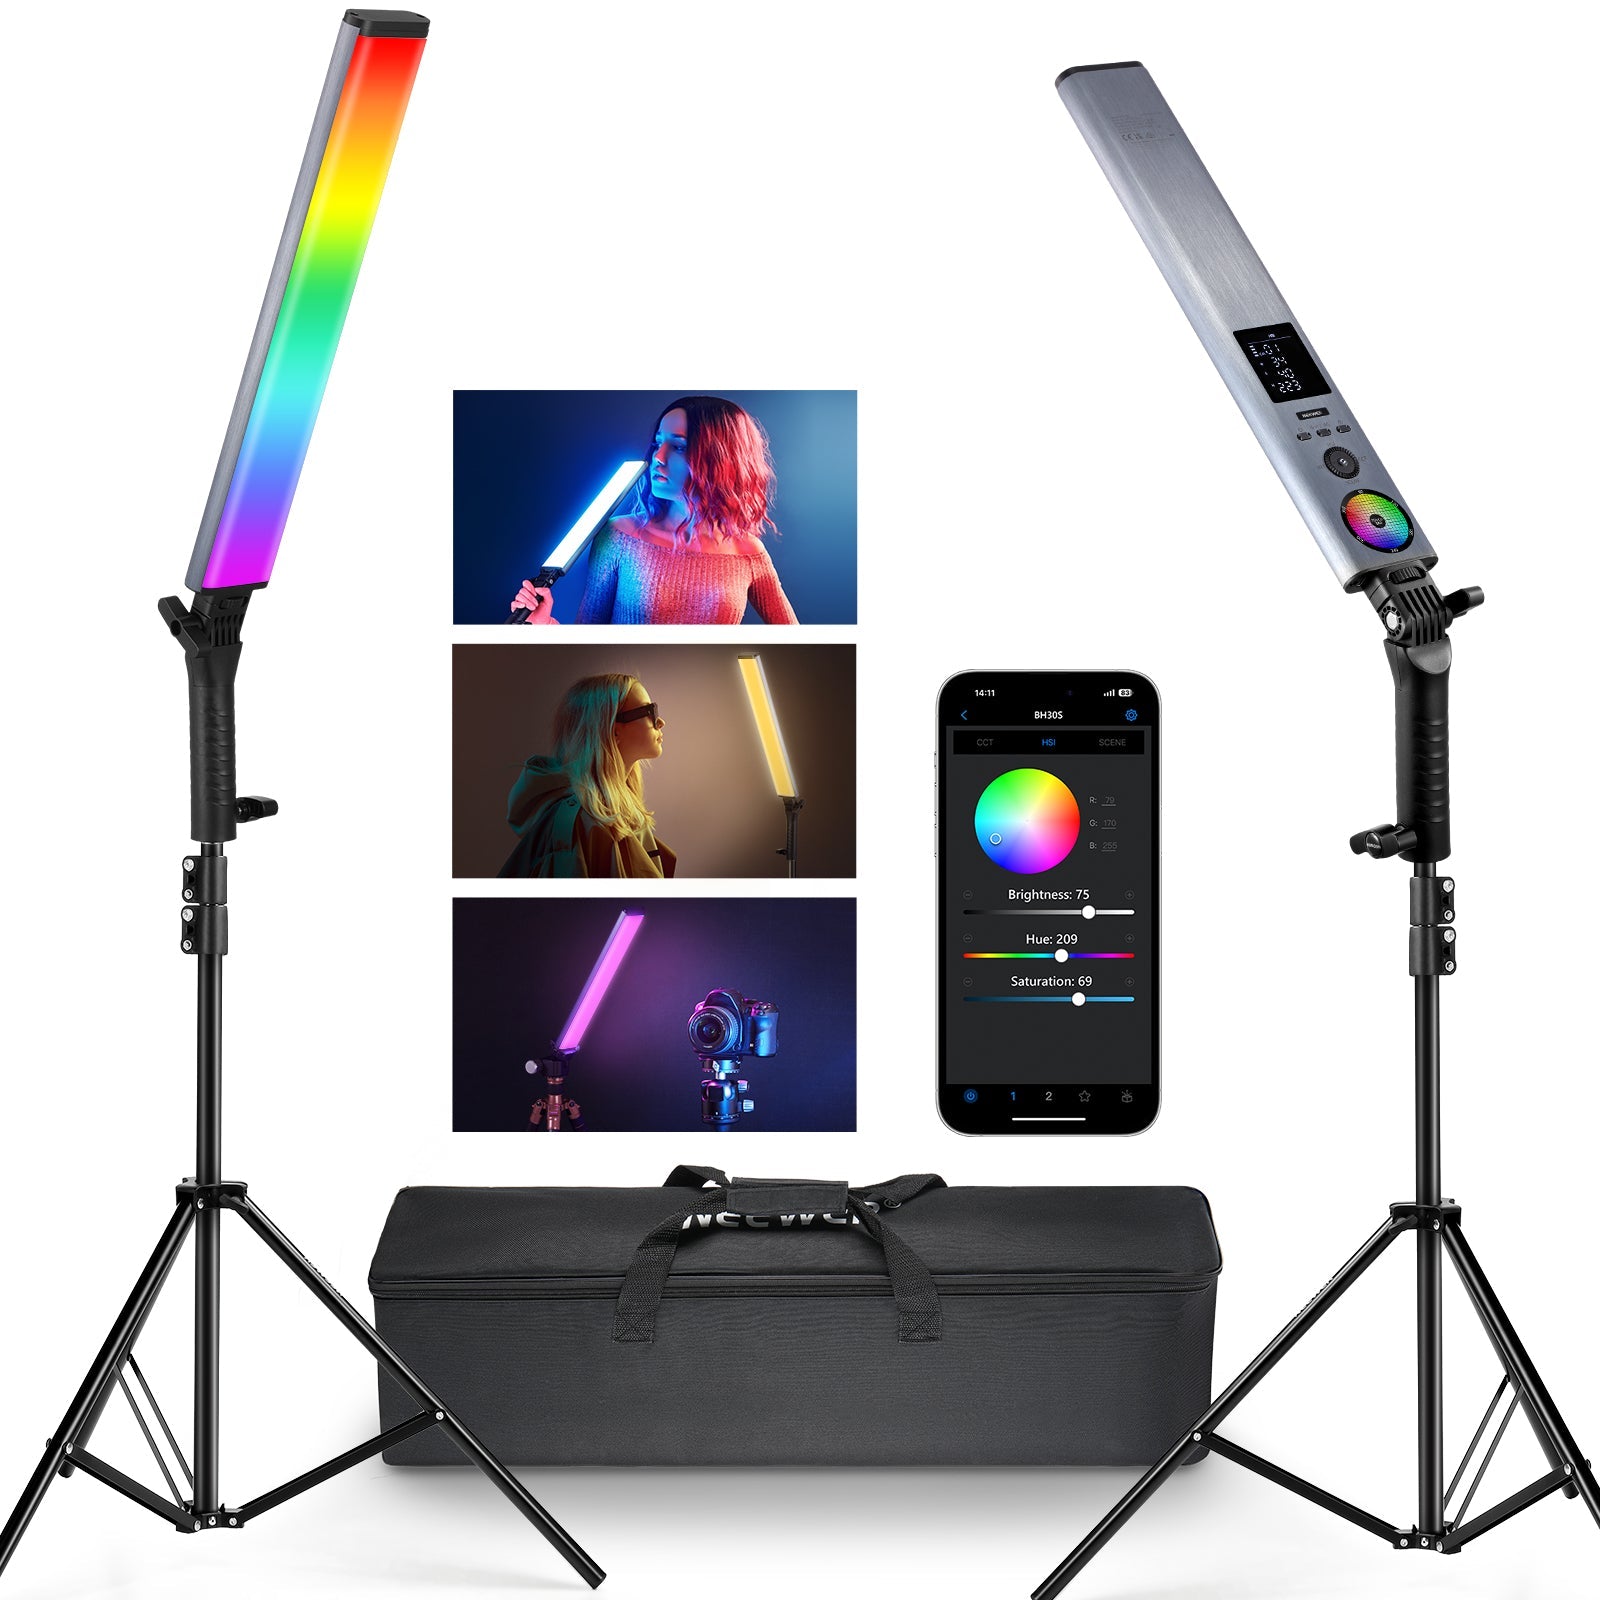 Light Up Your Studio with The Neewer BH20B Remote LED Light Kit